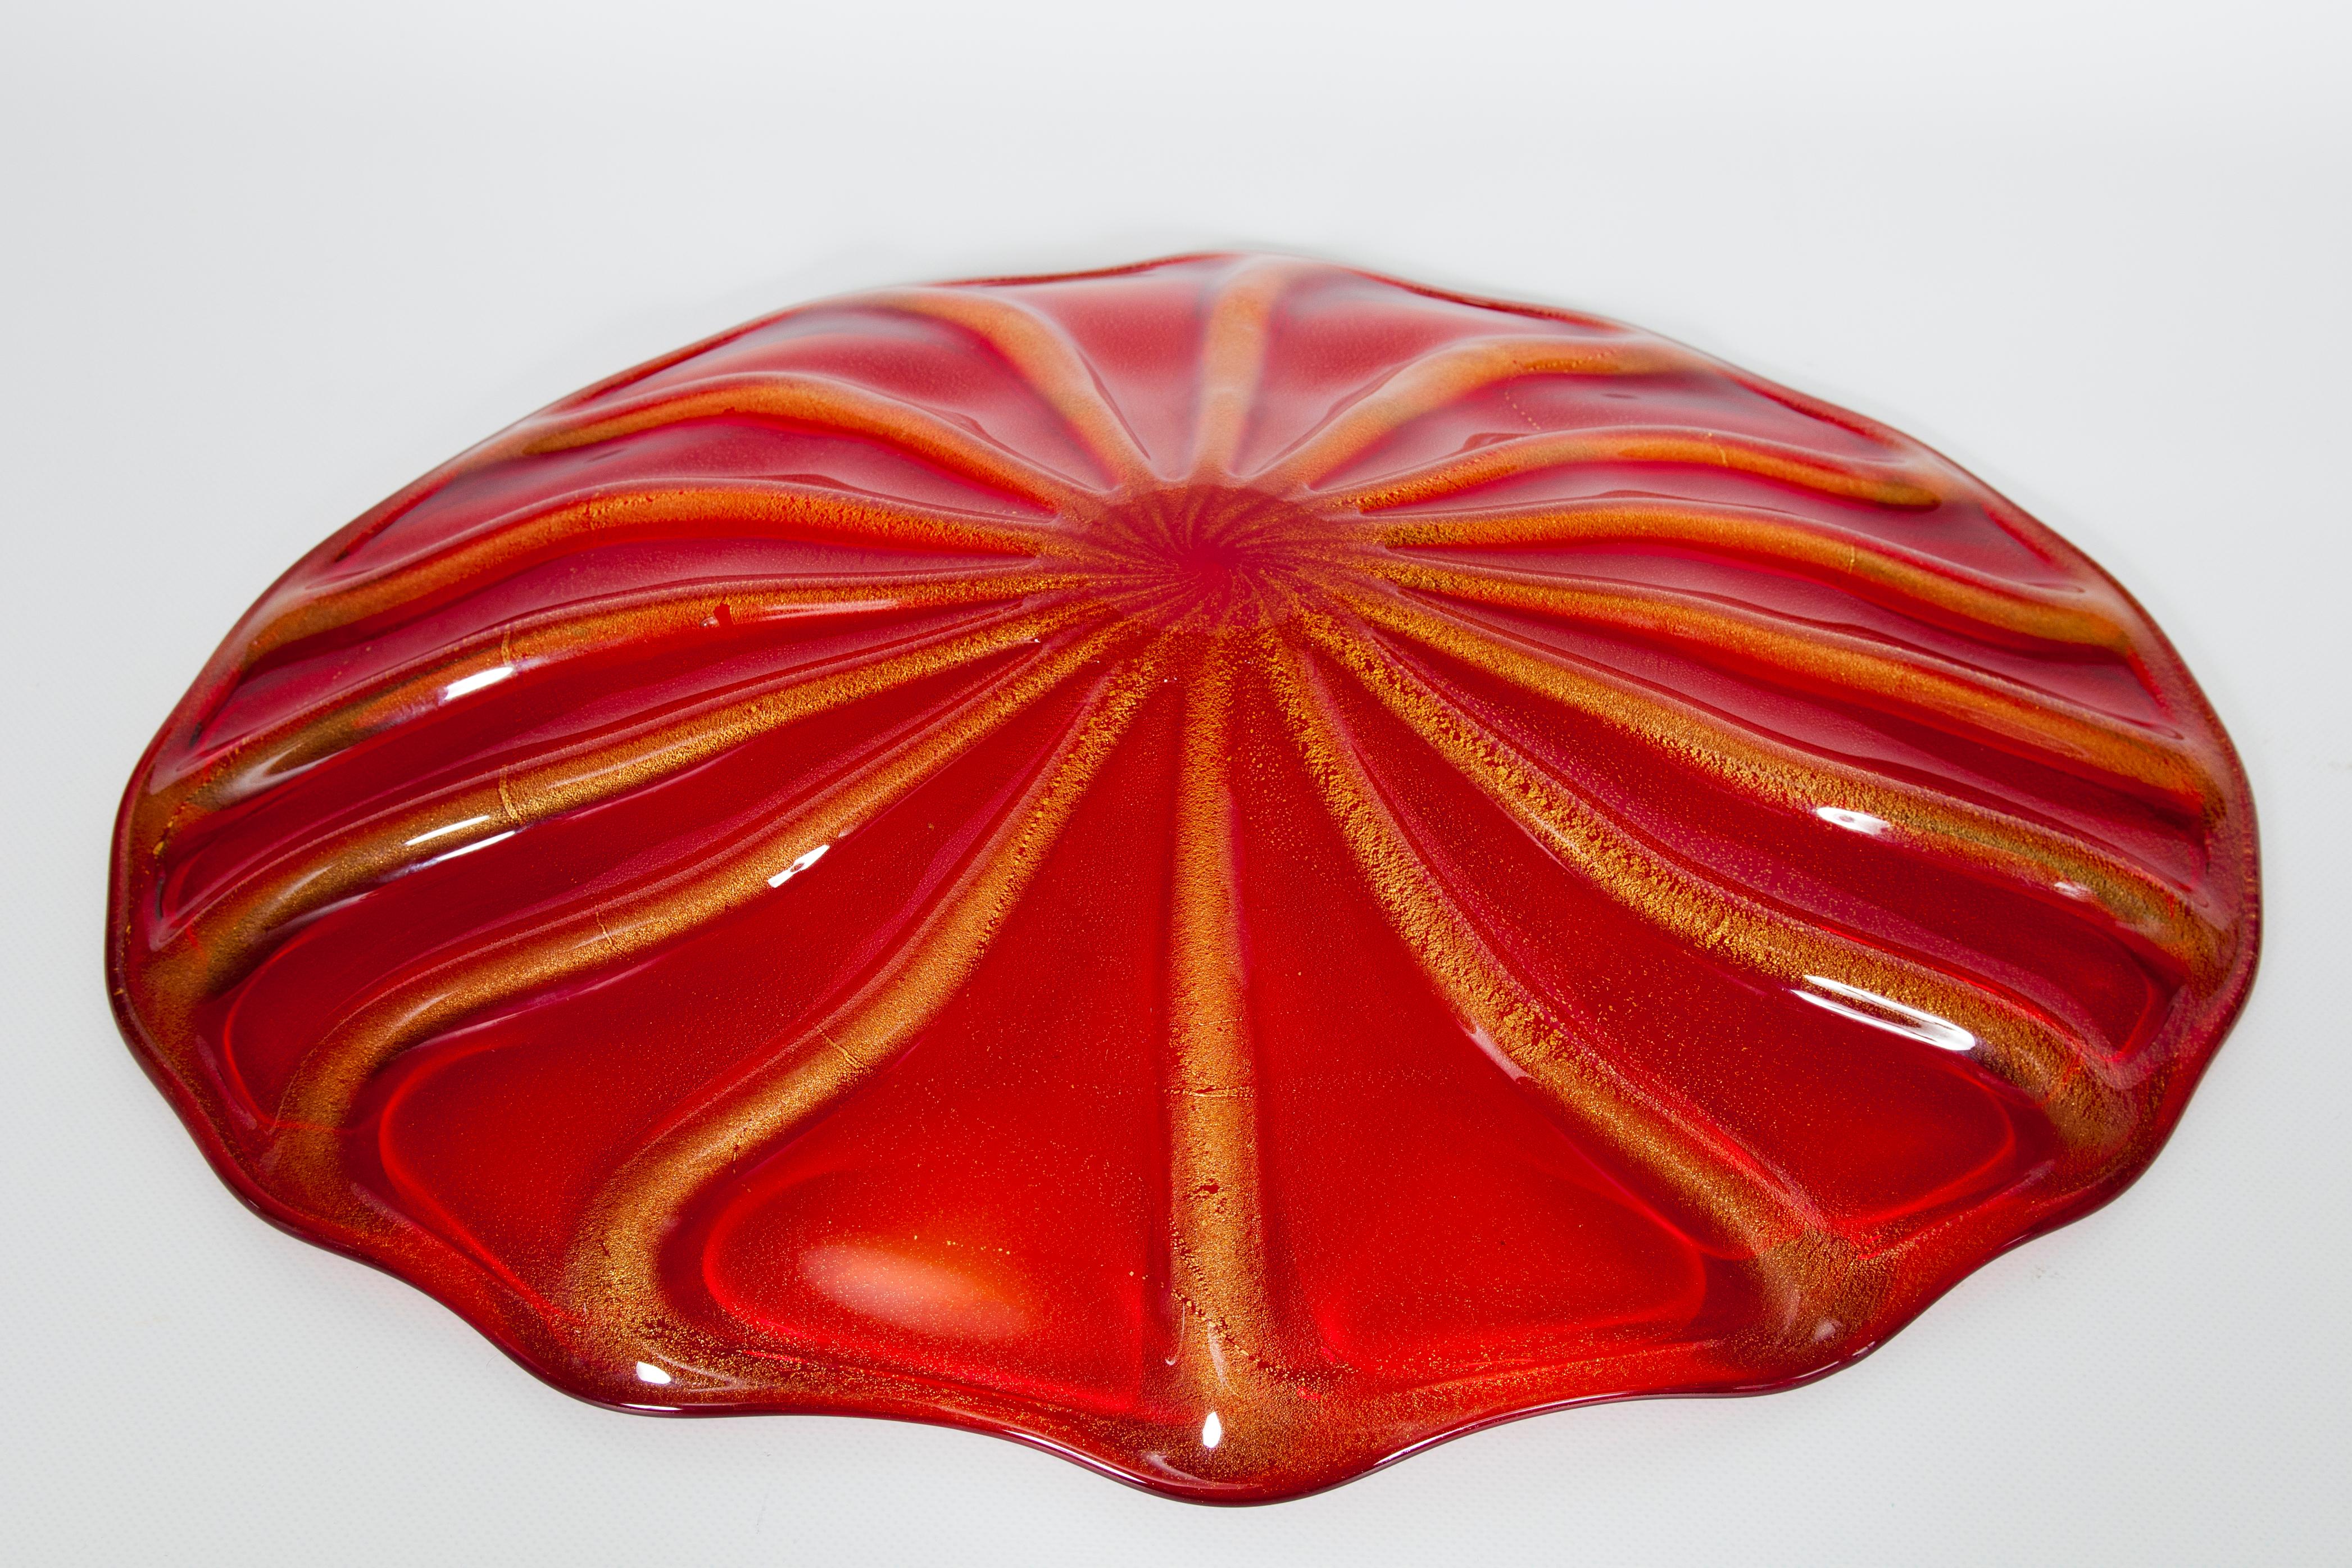 Italian Venetian Red Murano Glass Centerpiece with Submerged Gold, 2000s For Sale 2